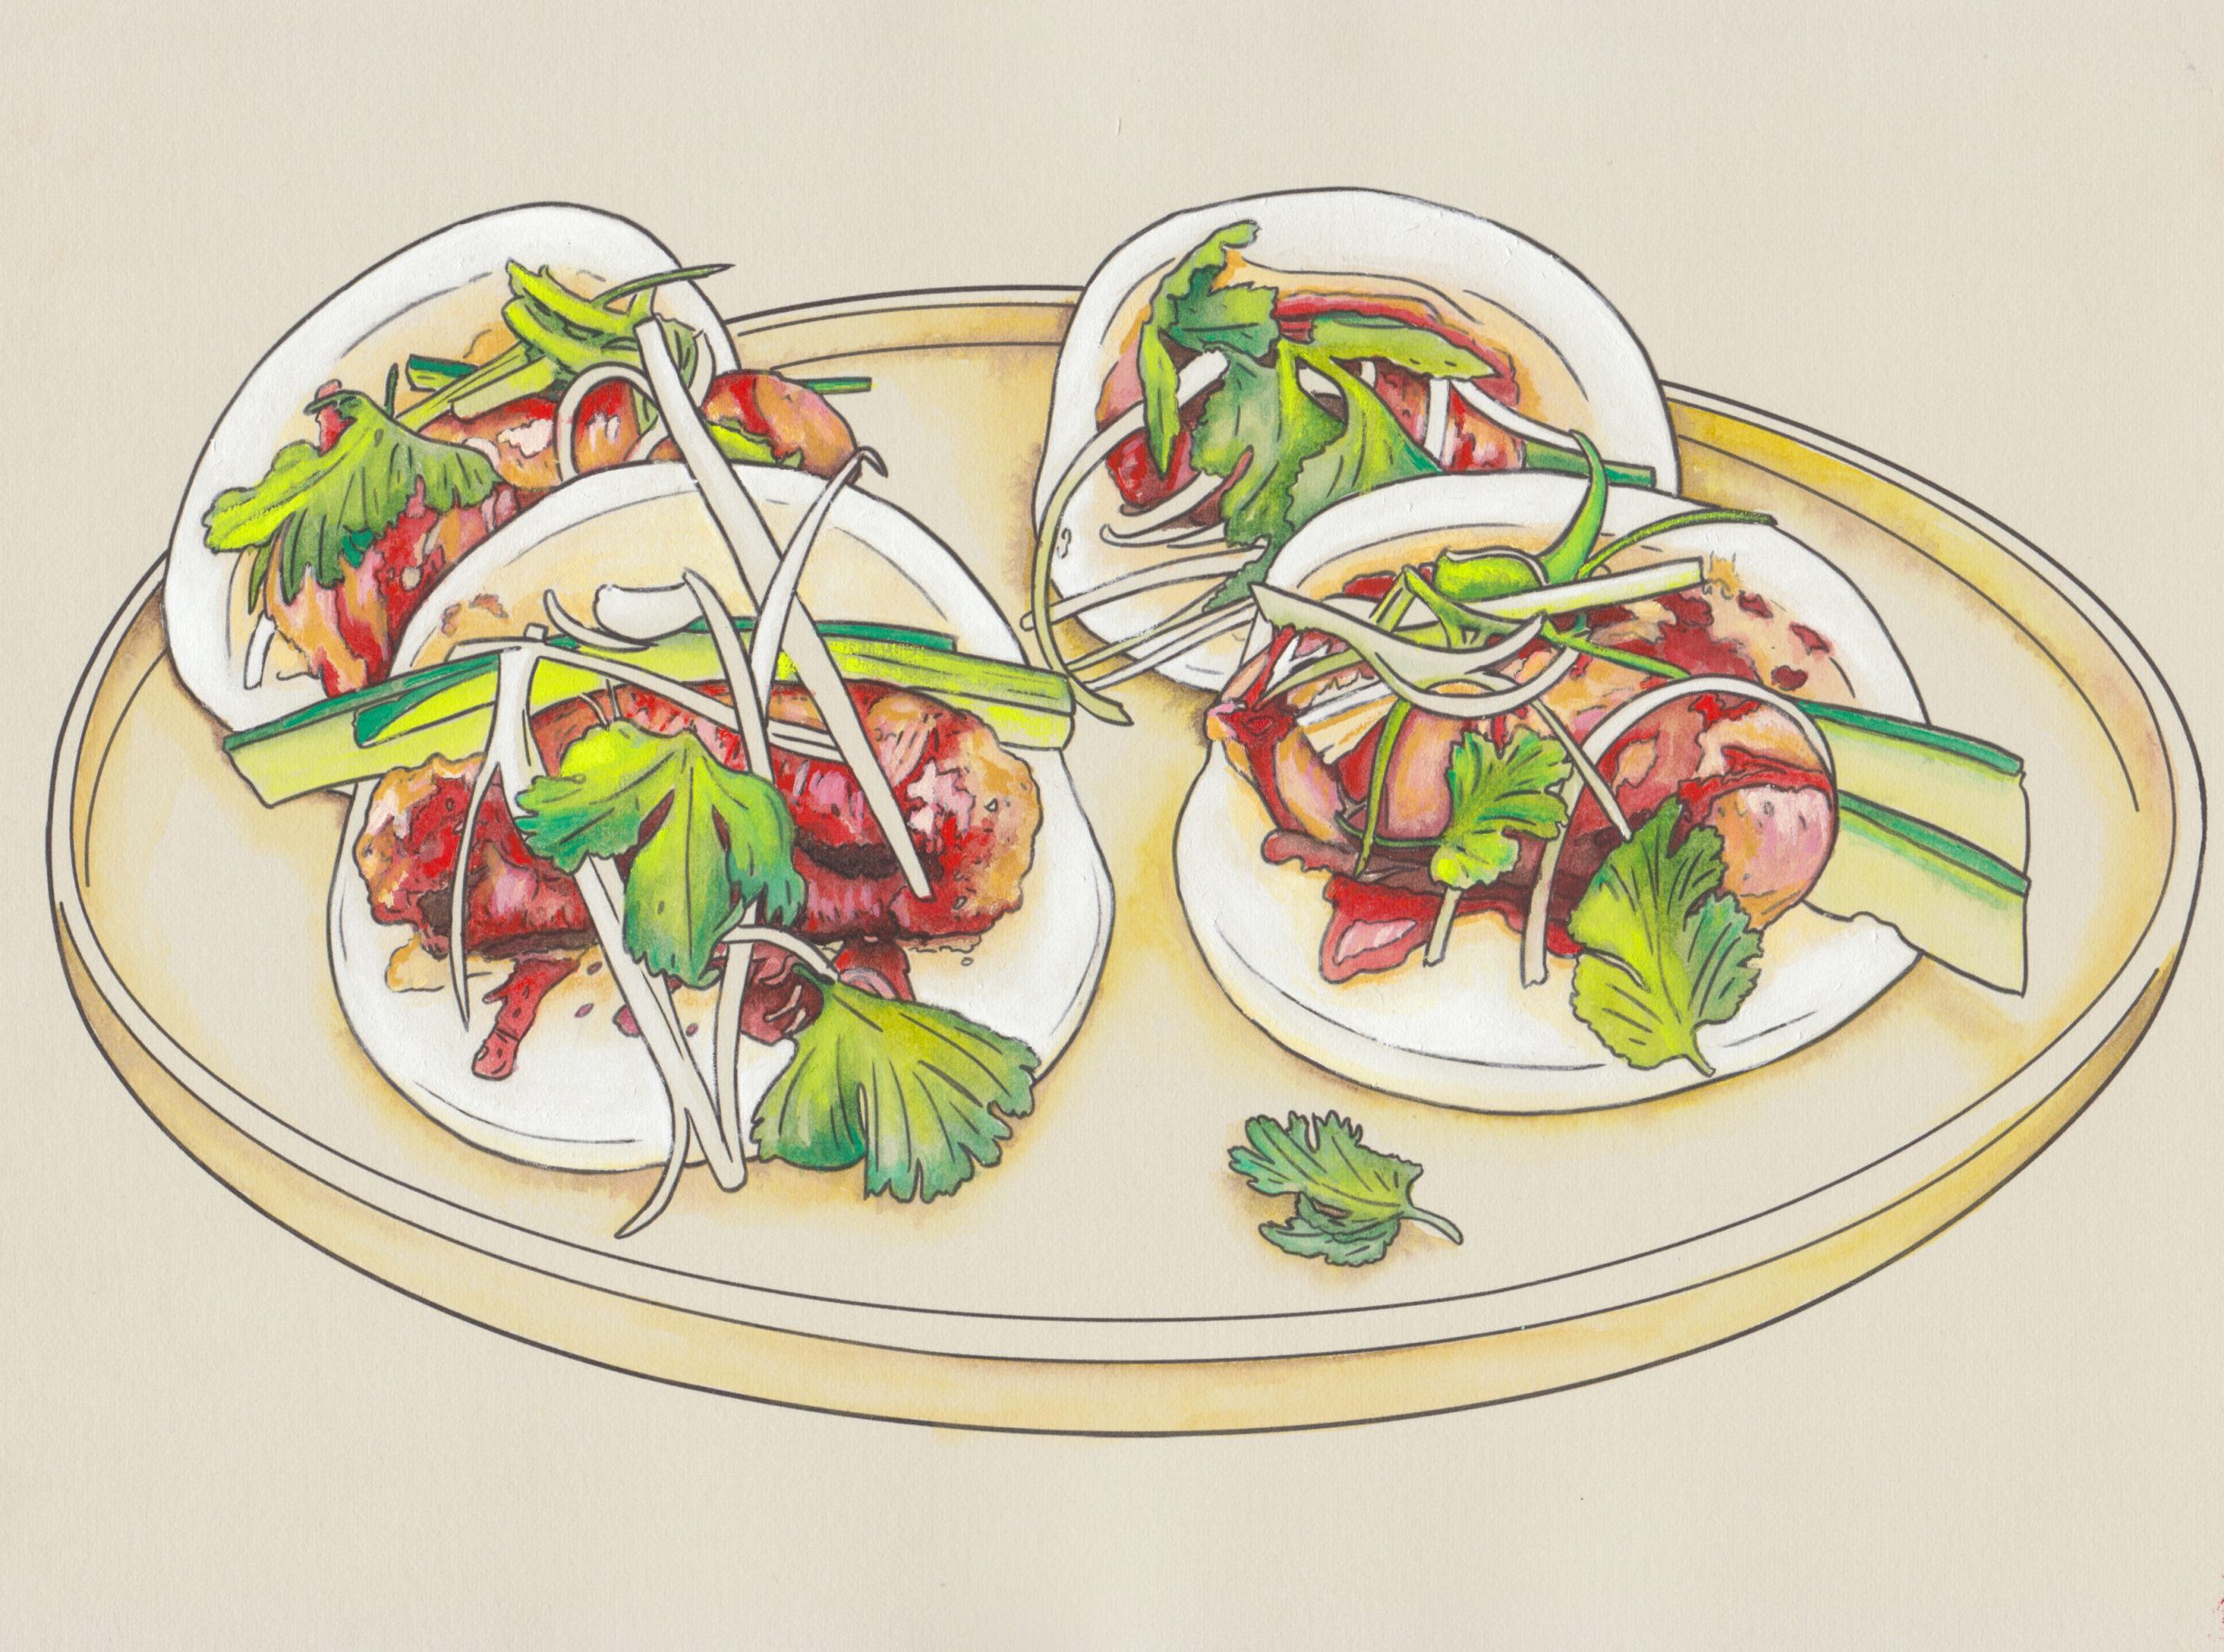 4 steam bao buns sit on a cream-colored round plate with a low rim against a cream background. The buns are filled with pork sausage drizzled with hoisin sauce, slices of cucumber, pickled green onion, and garnished with cilantro leaves. The illustration is precisely rendered with black ink linework and hand-painted with meticulous watercolor washes and detail work with gouache paint.